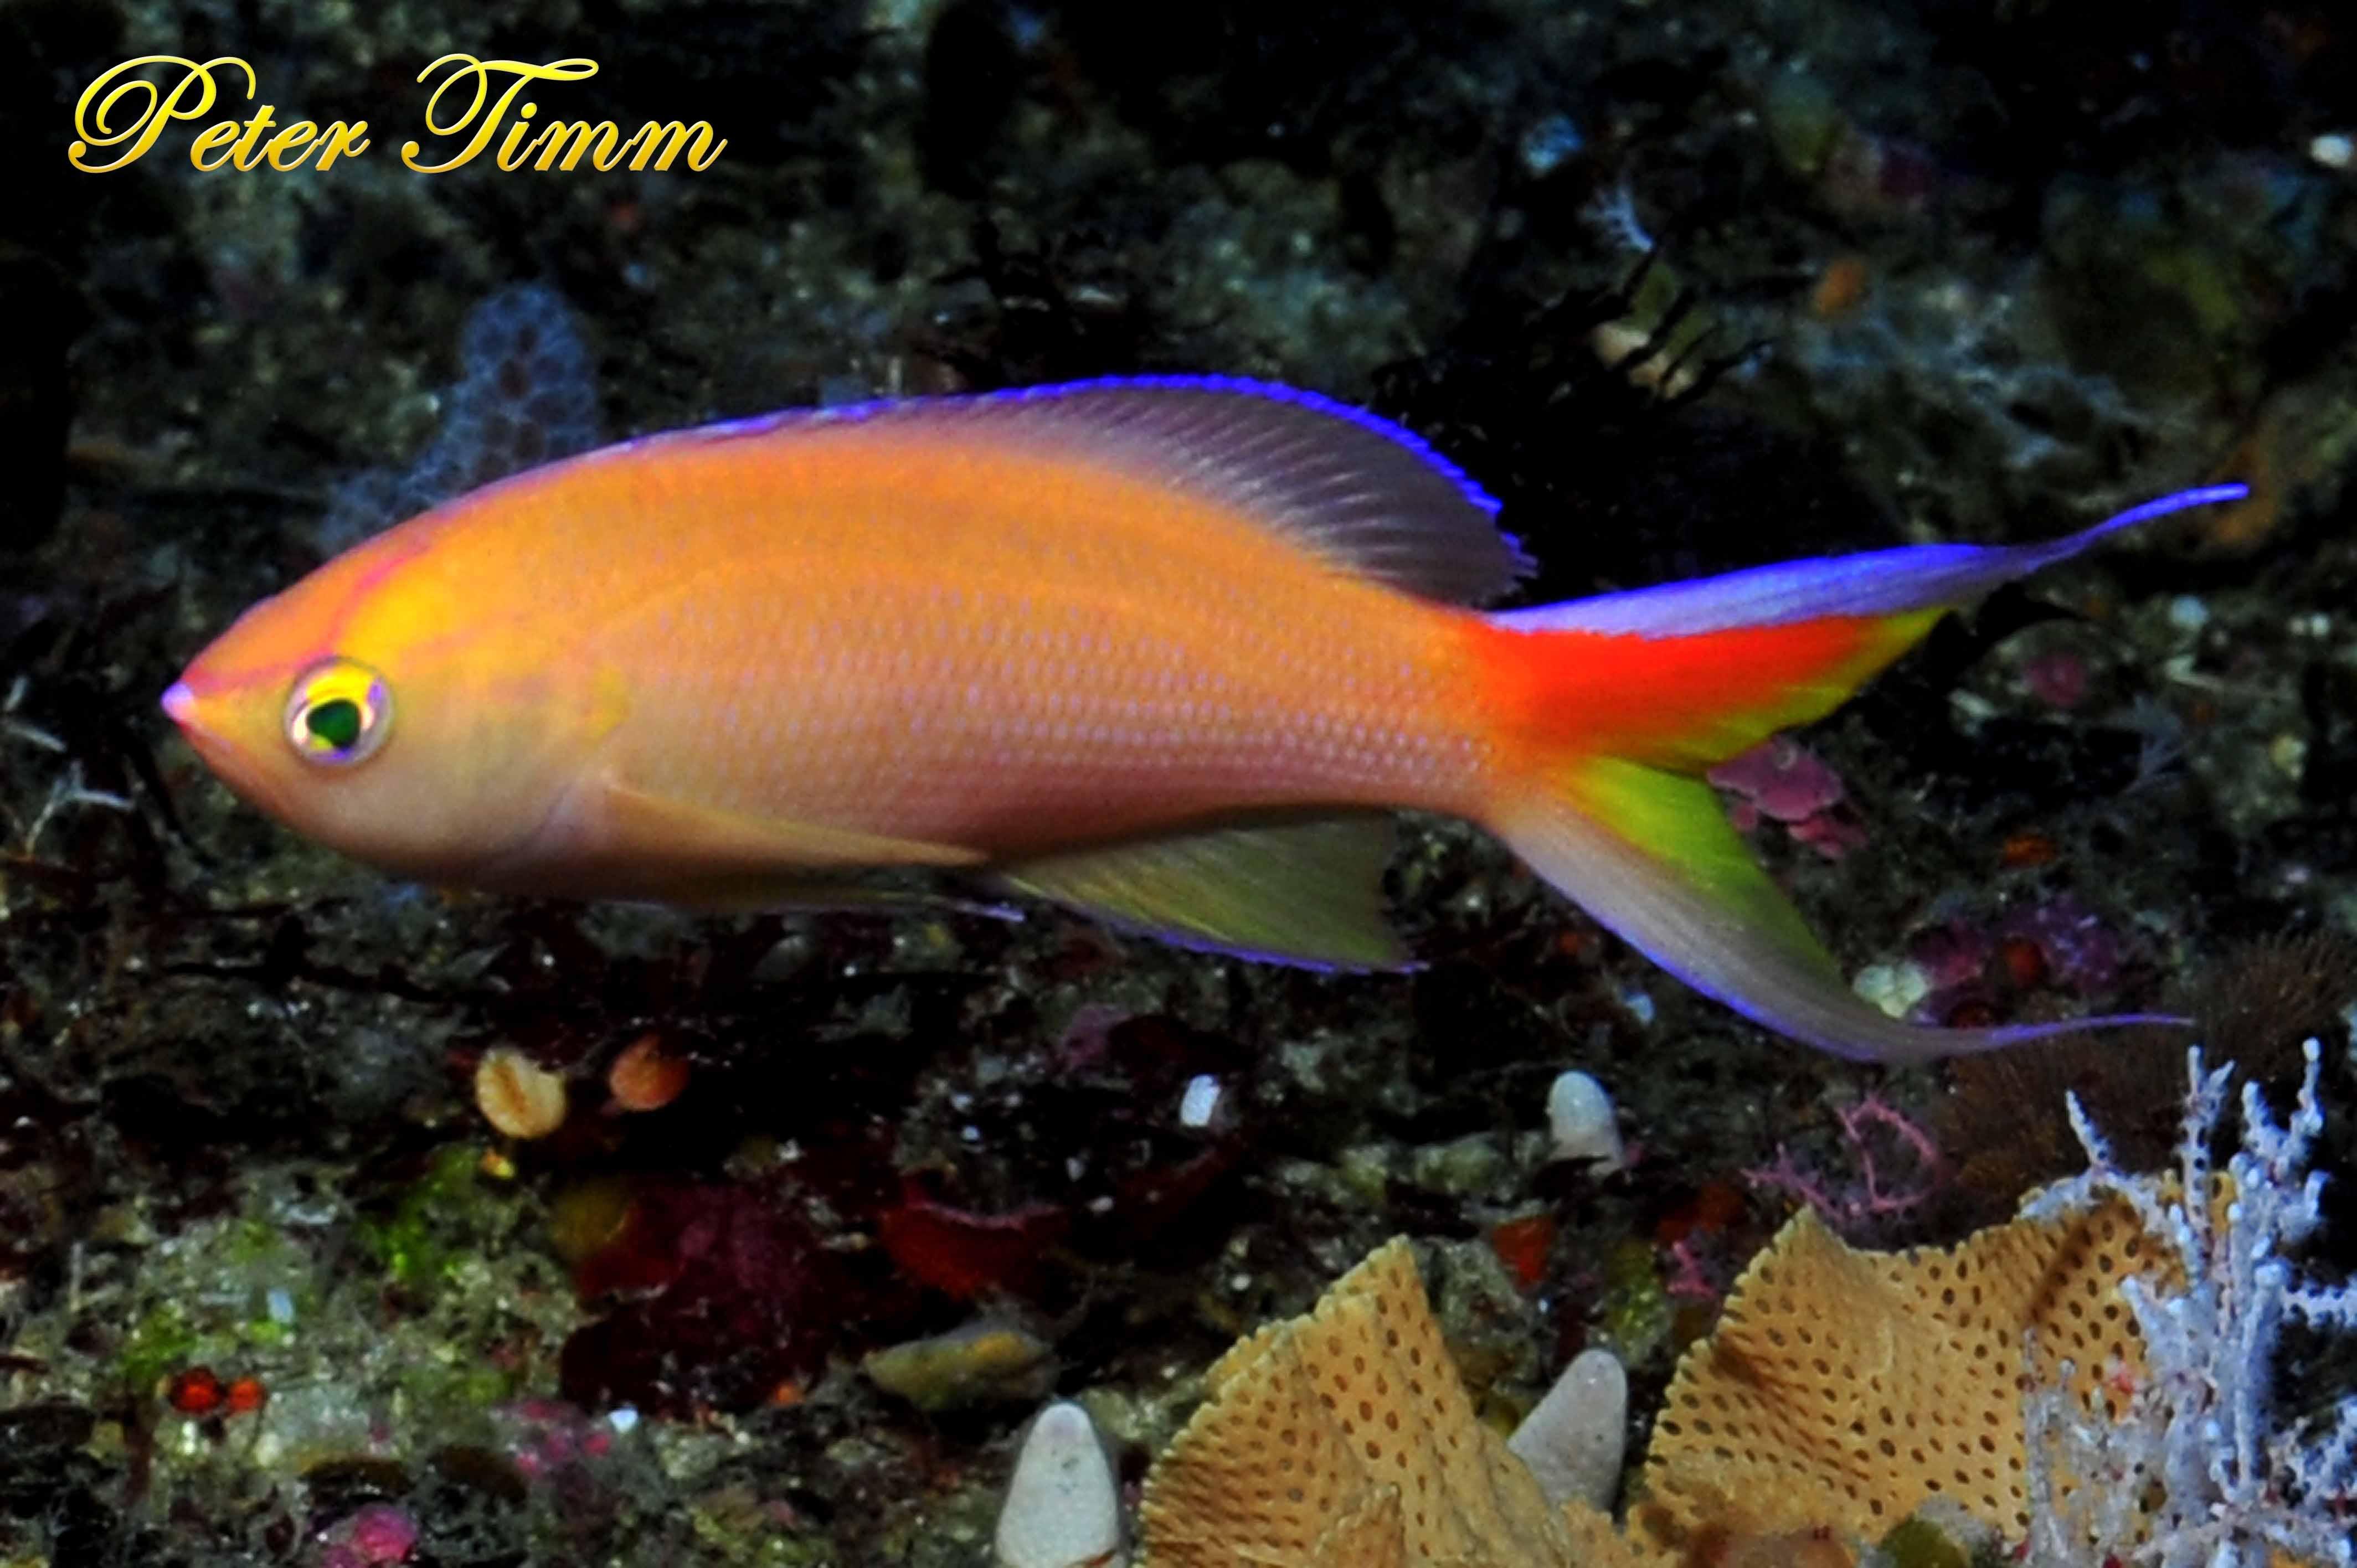 The lunate goldie, Pseudanthias lunulatus, a new species record for South Africa. Photo: Peter Timm